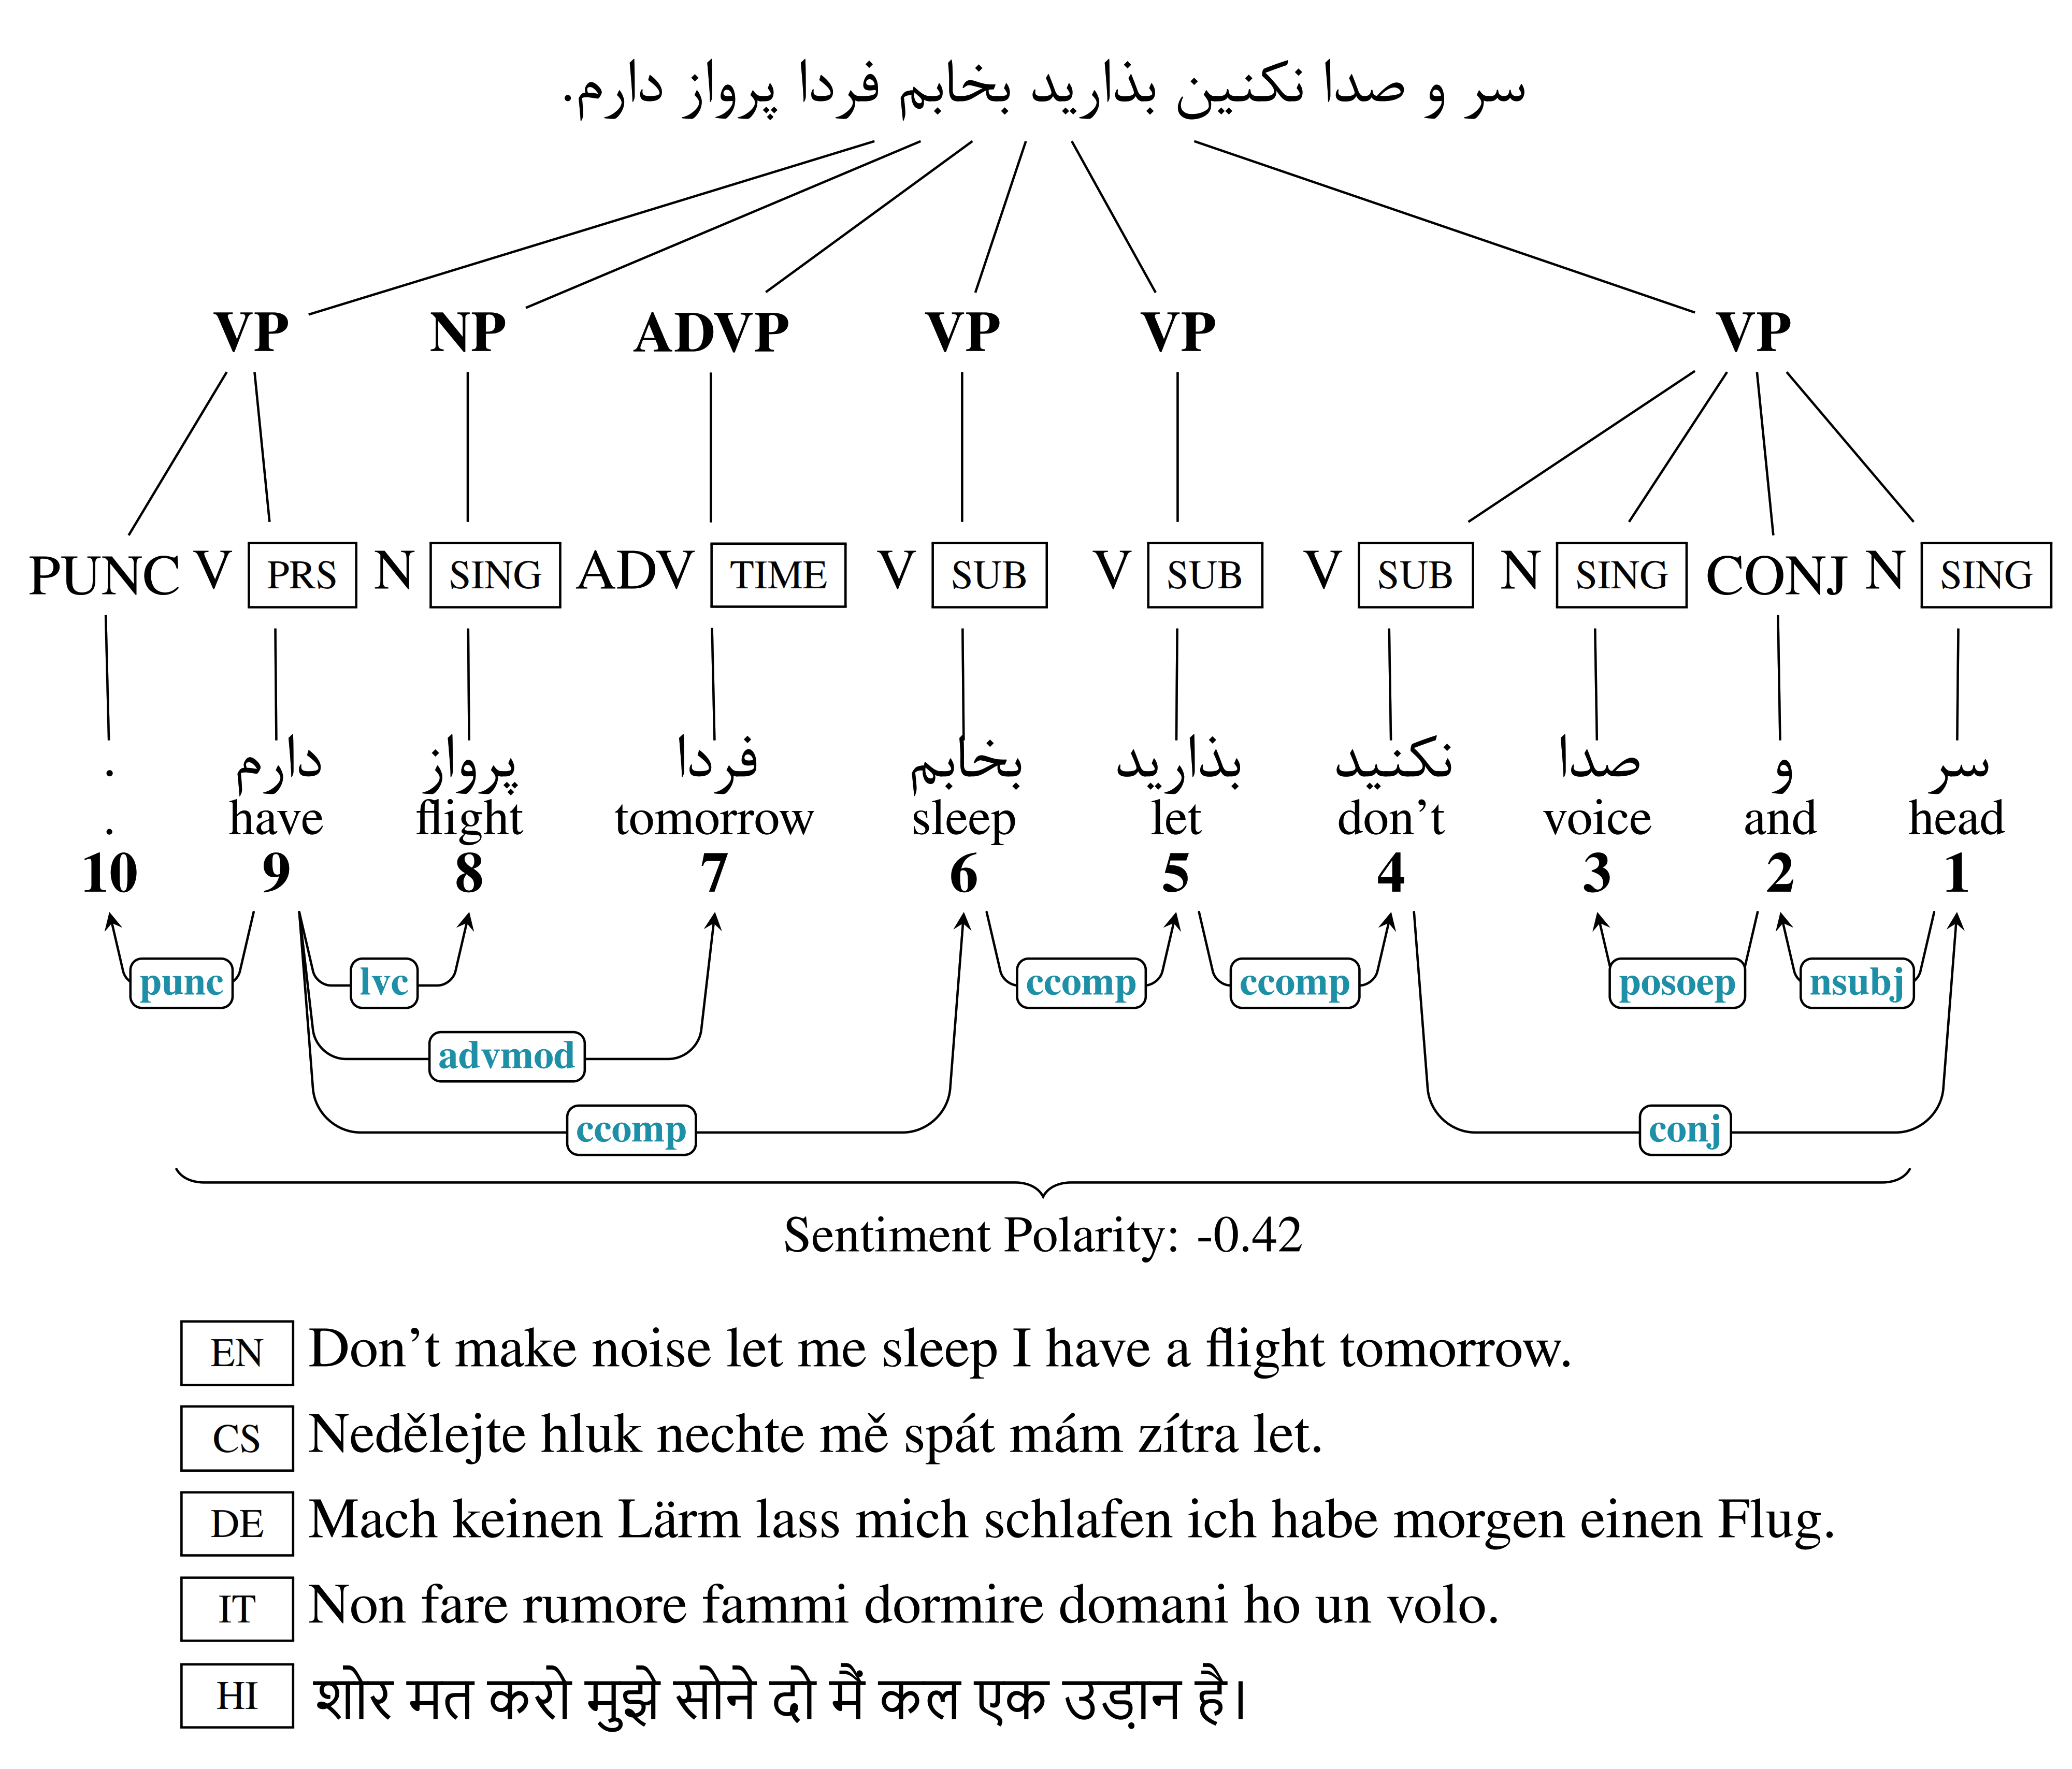 A sample of the extracted sentence with dependency relations in syntactic annotation, part-of-speech tags, sentiment polarity and translations.